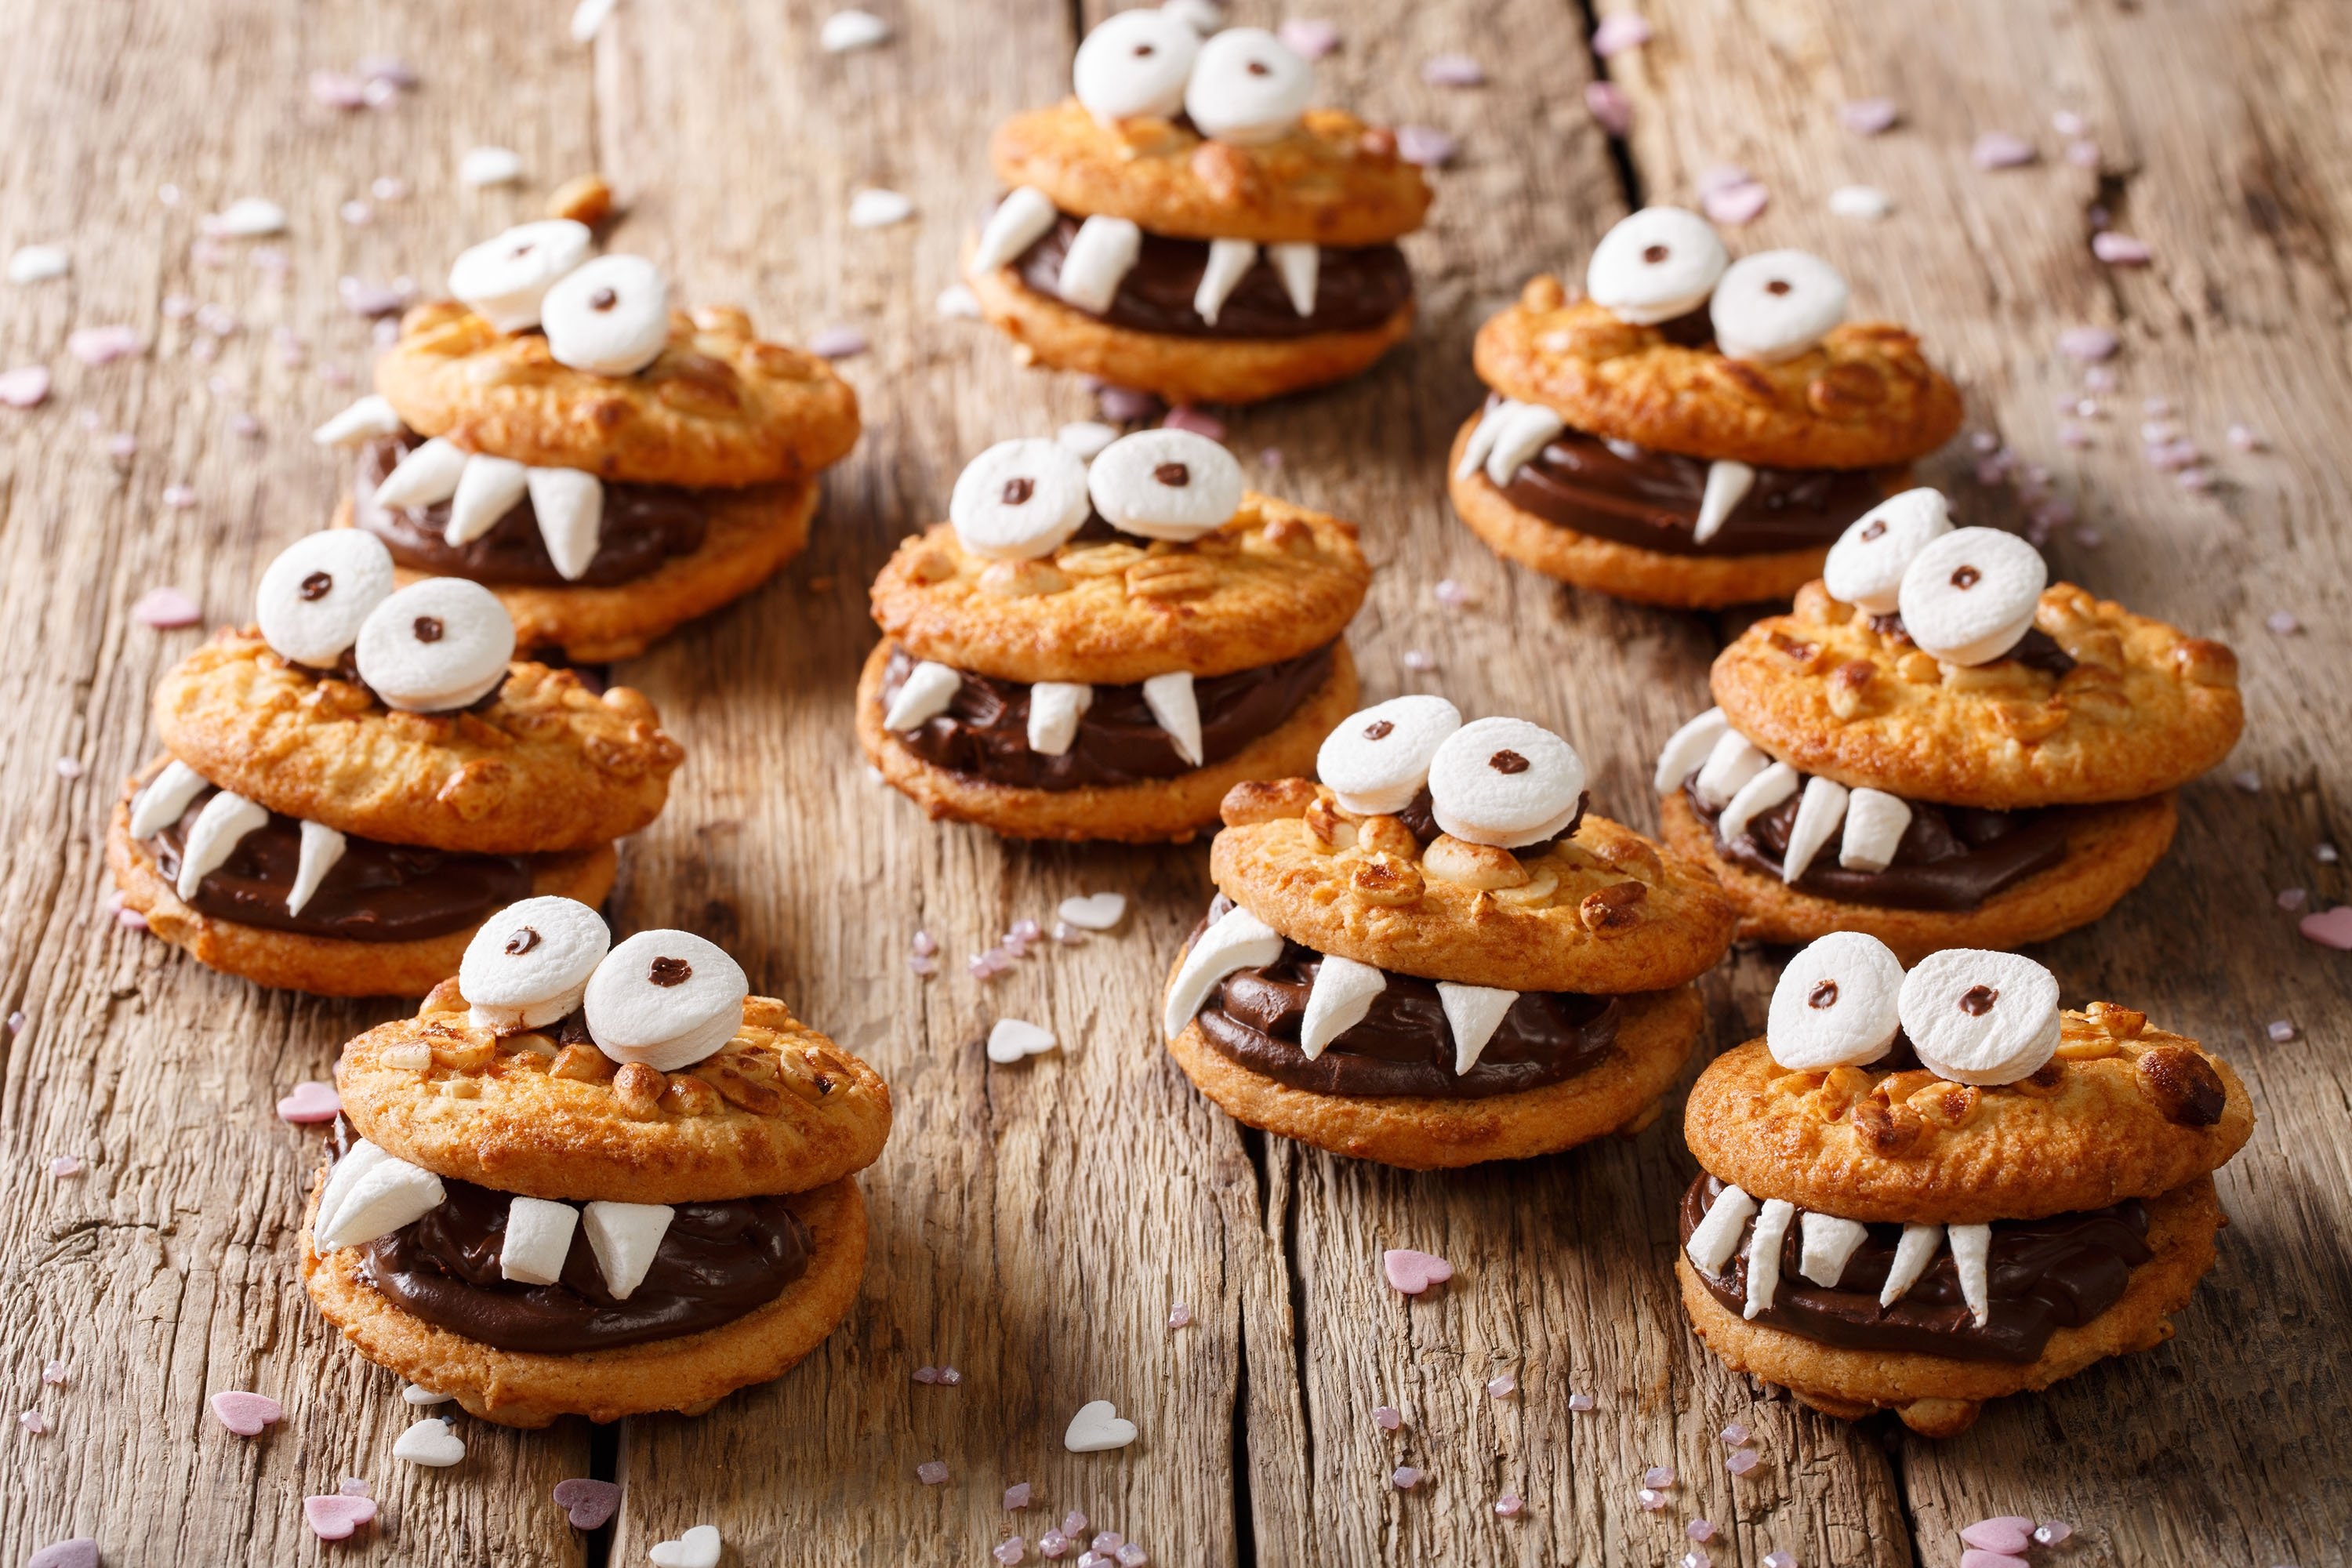 Funny monsters made out of cookies with chocolate. (Shutterstock Photo)